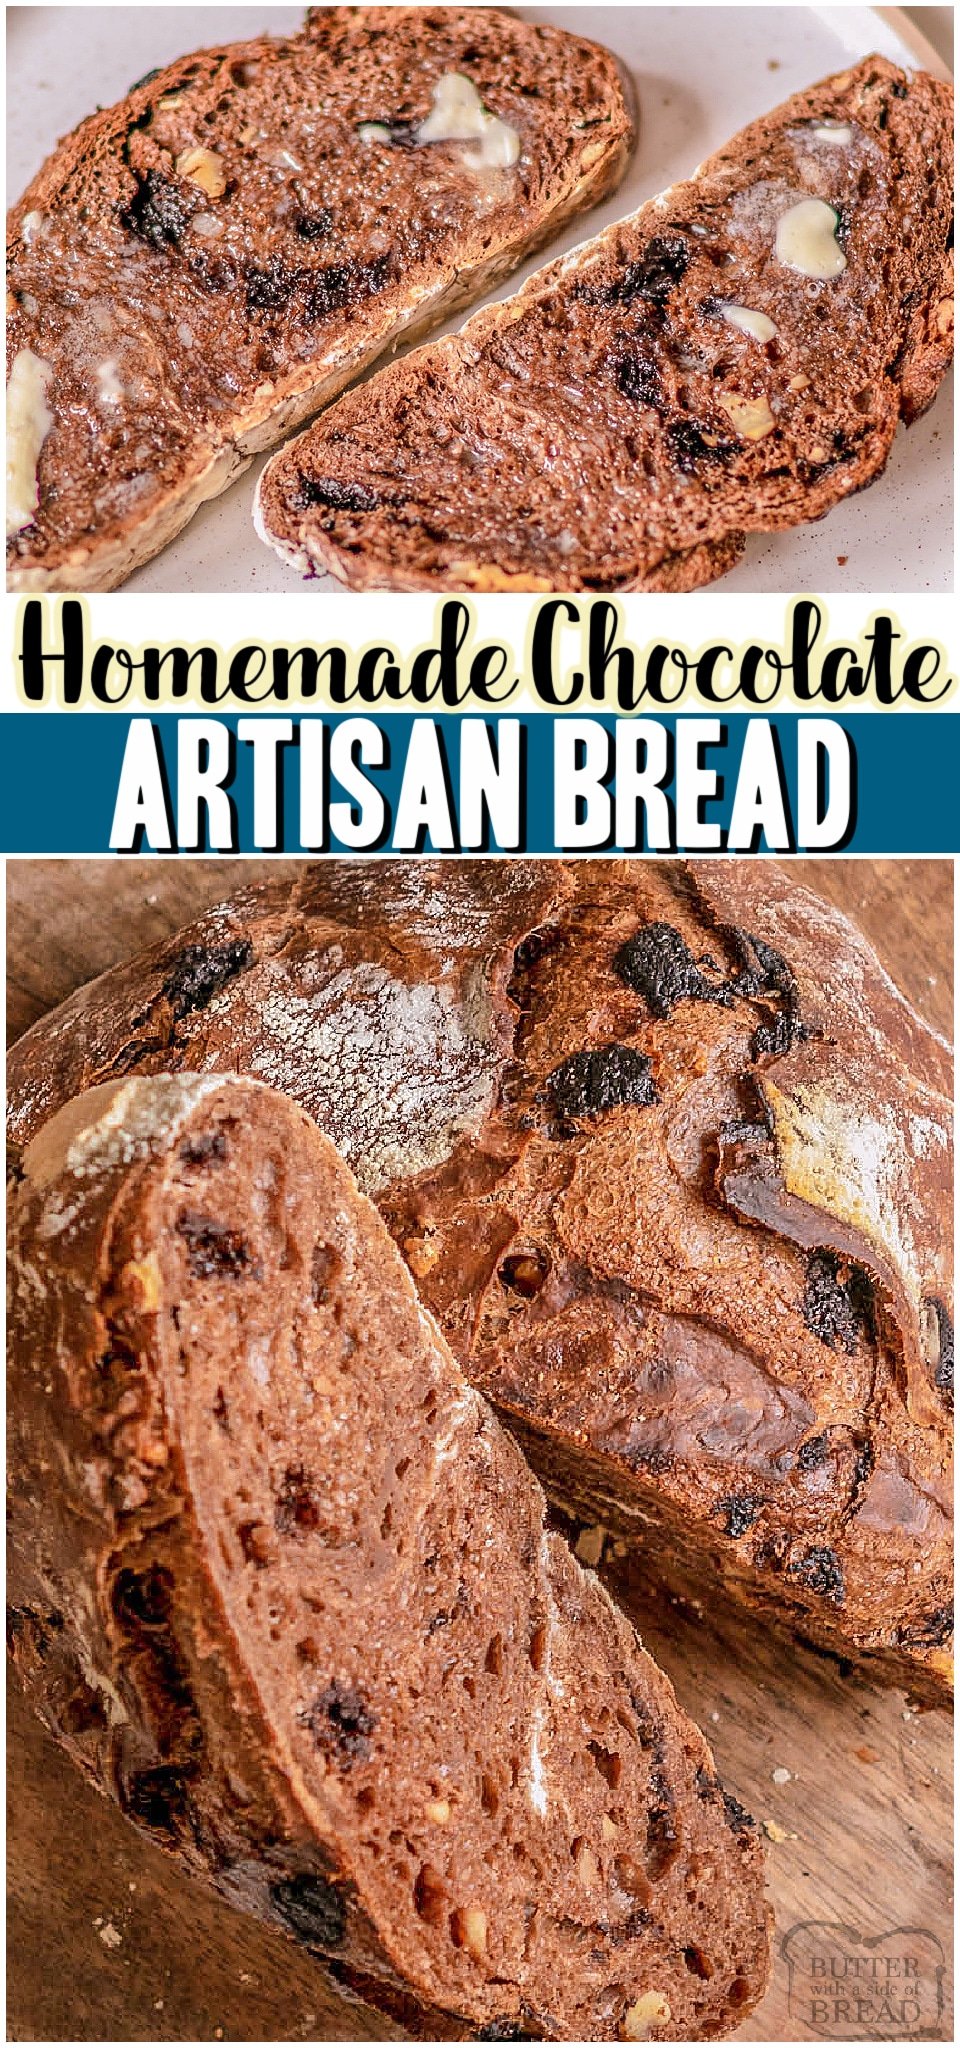 No-Knead Chocolate Artisan Bread is an easy to make crusty bread recipe that packs chocolate flavor into every chewy bite. With cocoa powder and chopped dark chocolate, this easy artisan bread is a delicious treat! #bread #artisan #noknead #chocolate #baking #easyrecipe from BUTTER WITH A SIDE OF BREAD